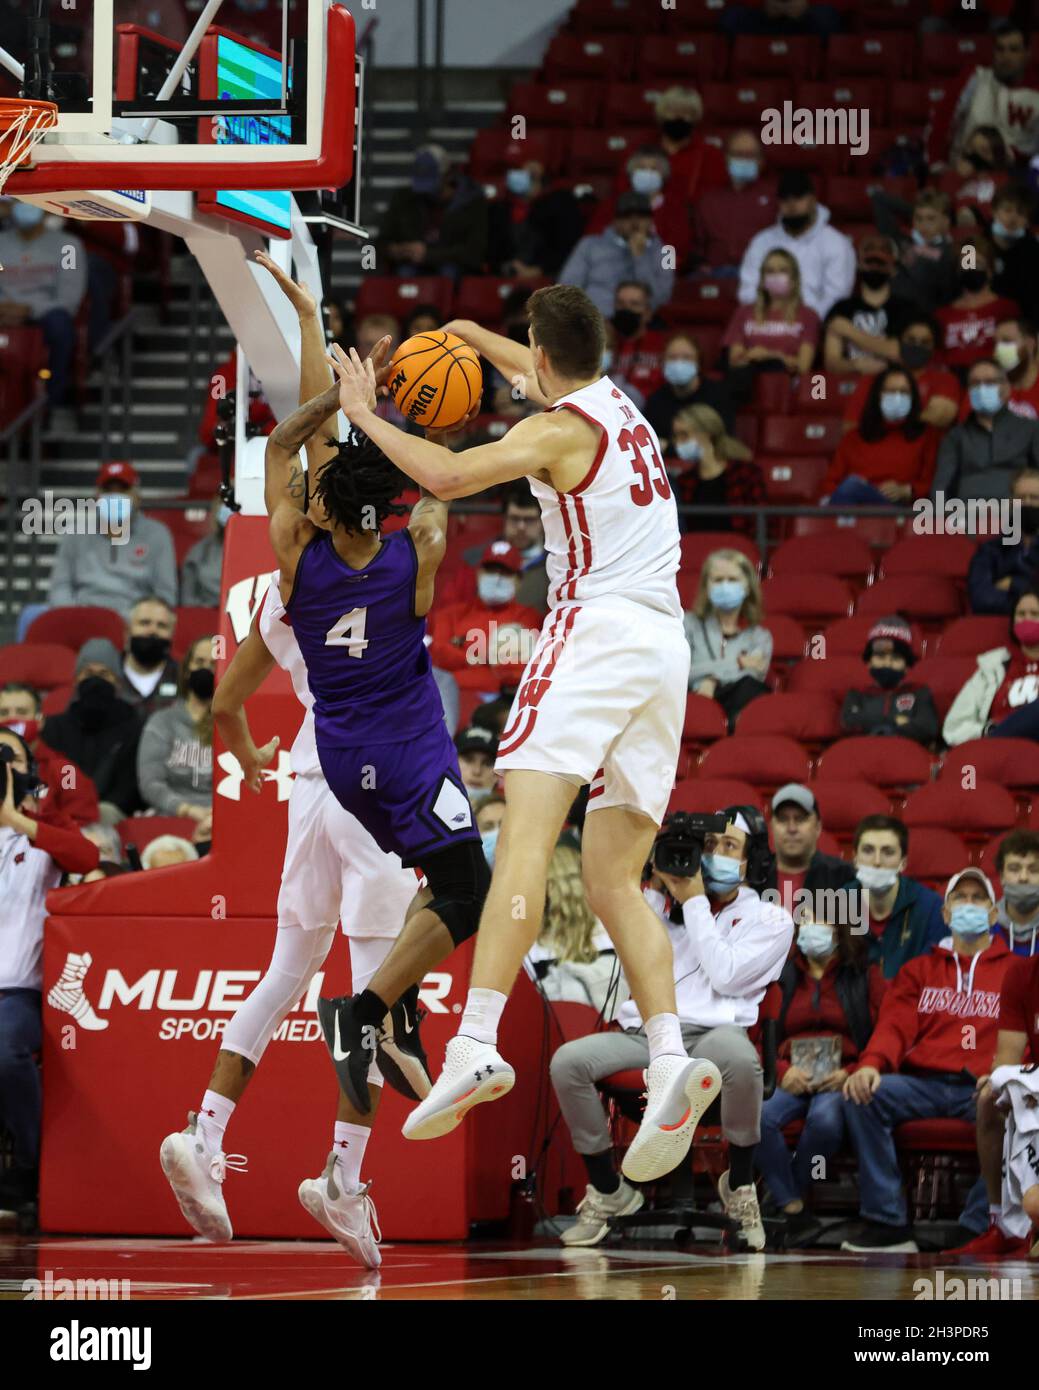 Madison, WI, USA. 29th Oct, 2021. Wisconsin Badgers center Chris Vogt (33) with a block during the NCAA Basketball game between the UW-Whitewater Warhawks and the Wisconsin Badgers at the Kohl Center